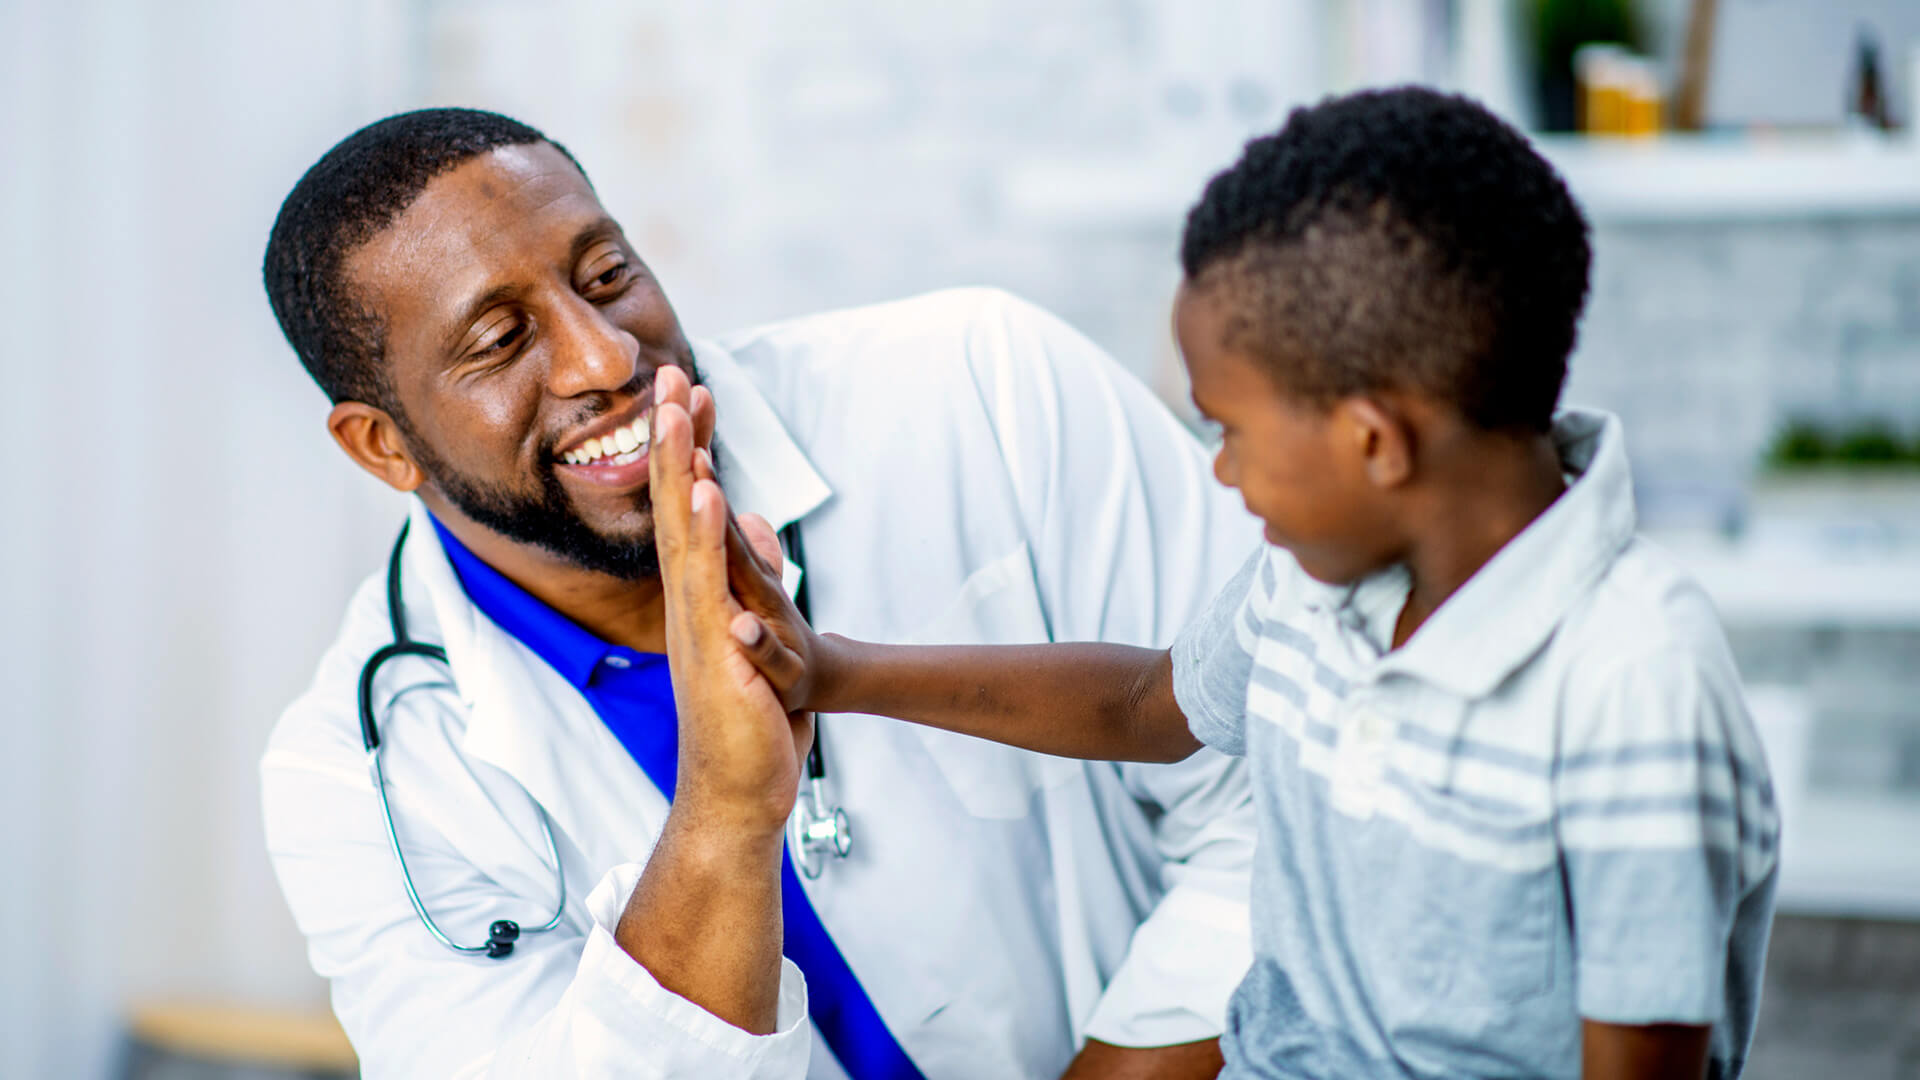 Physician high fiving child patient